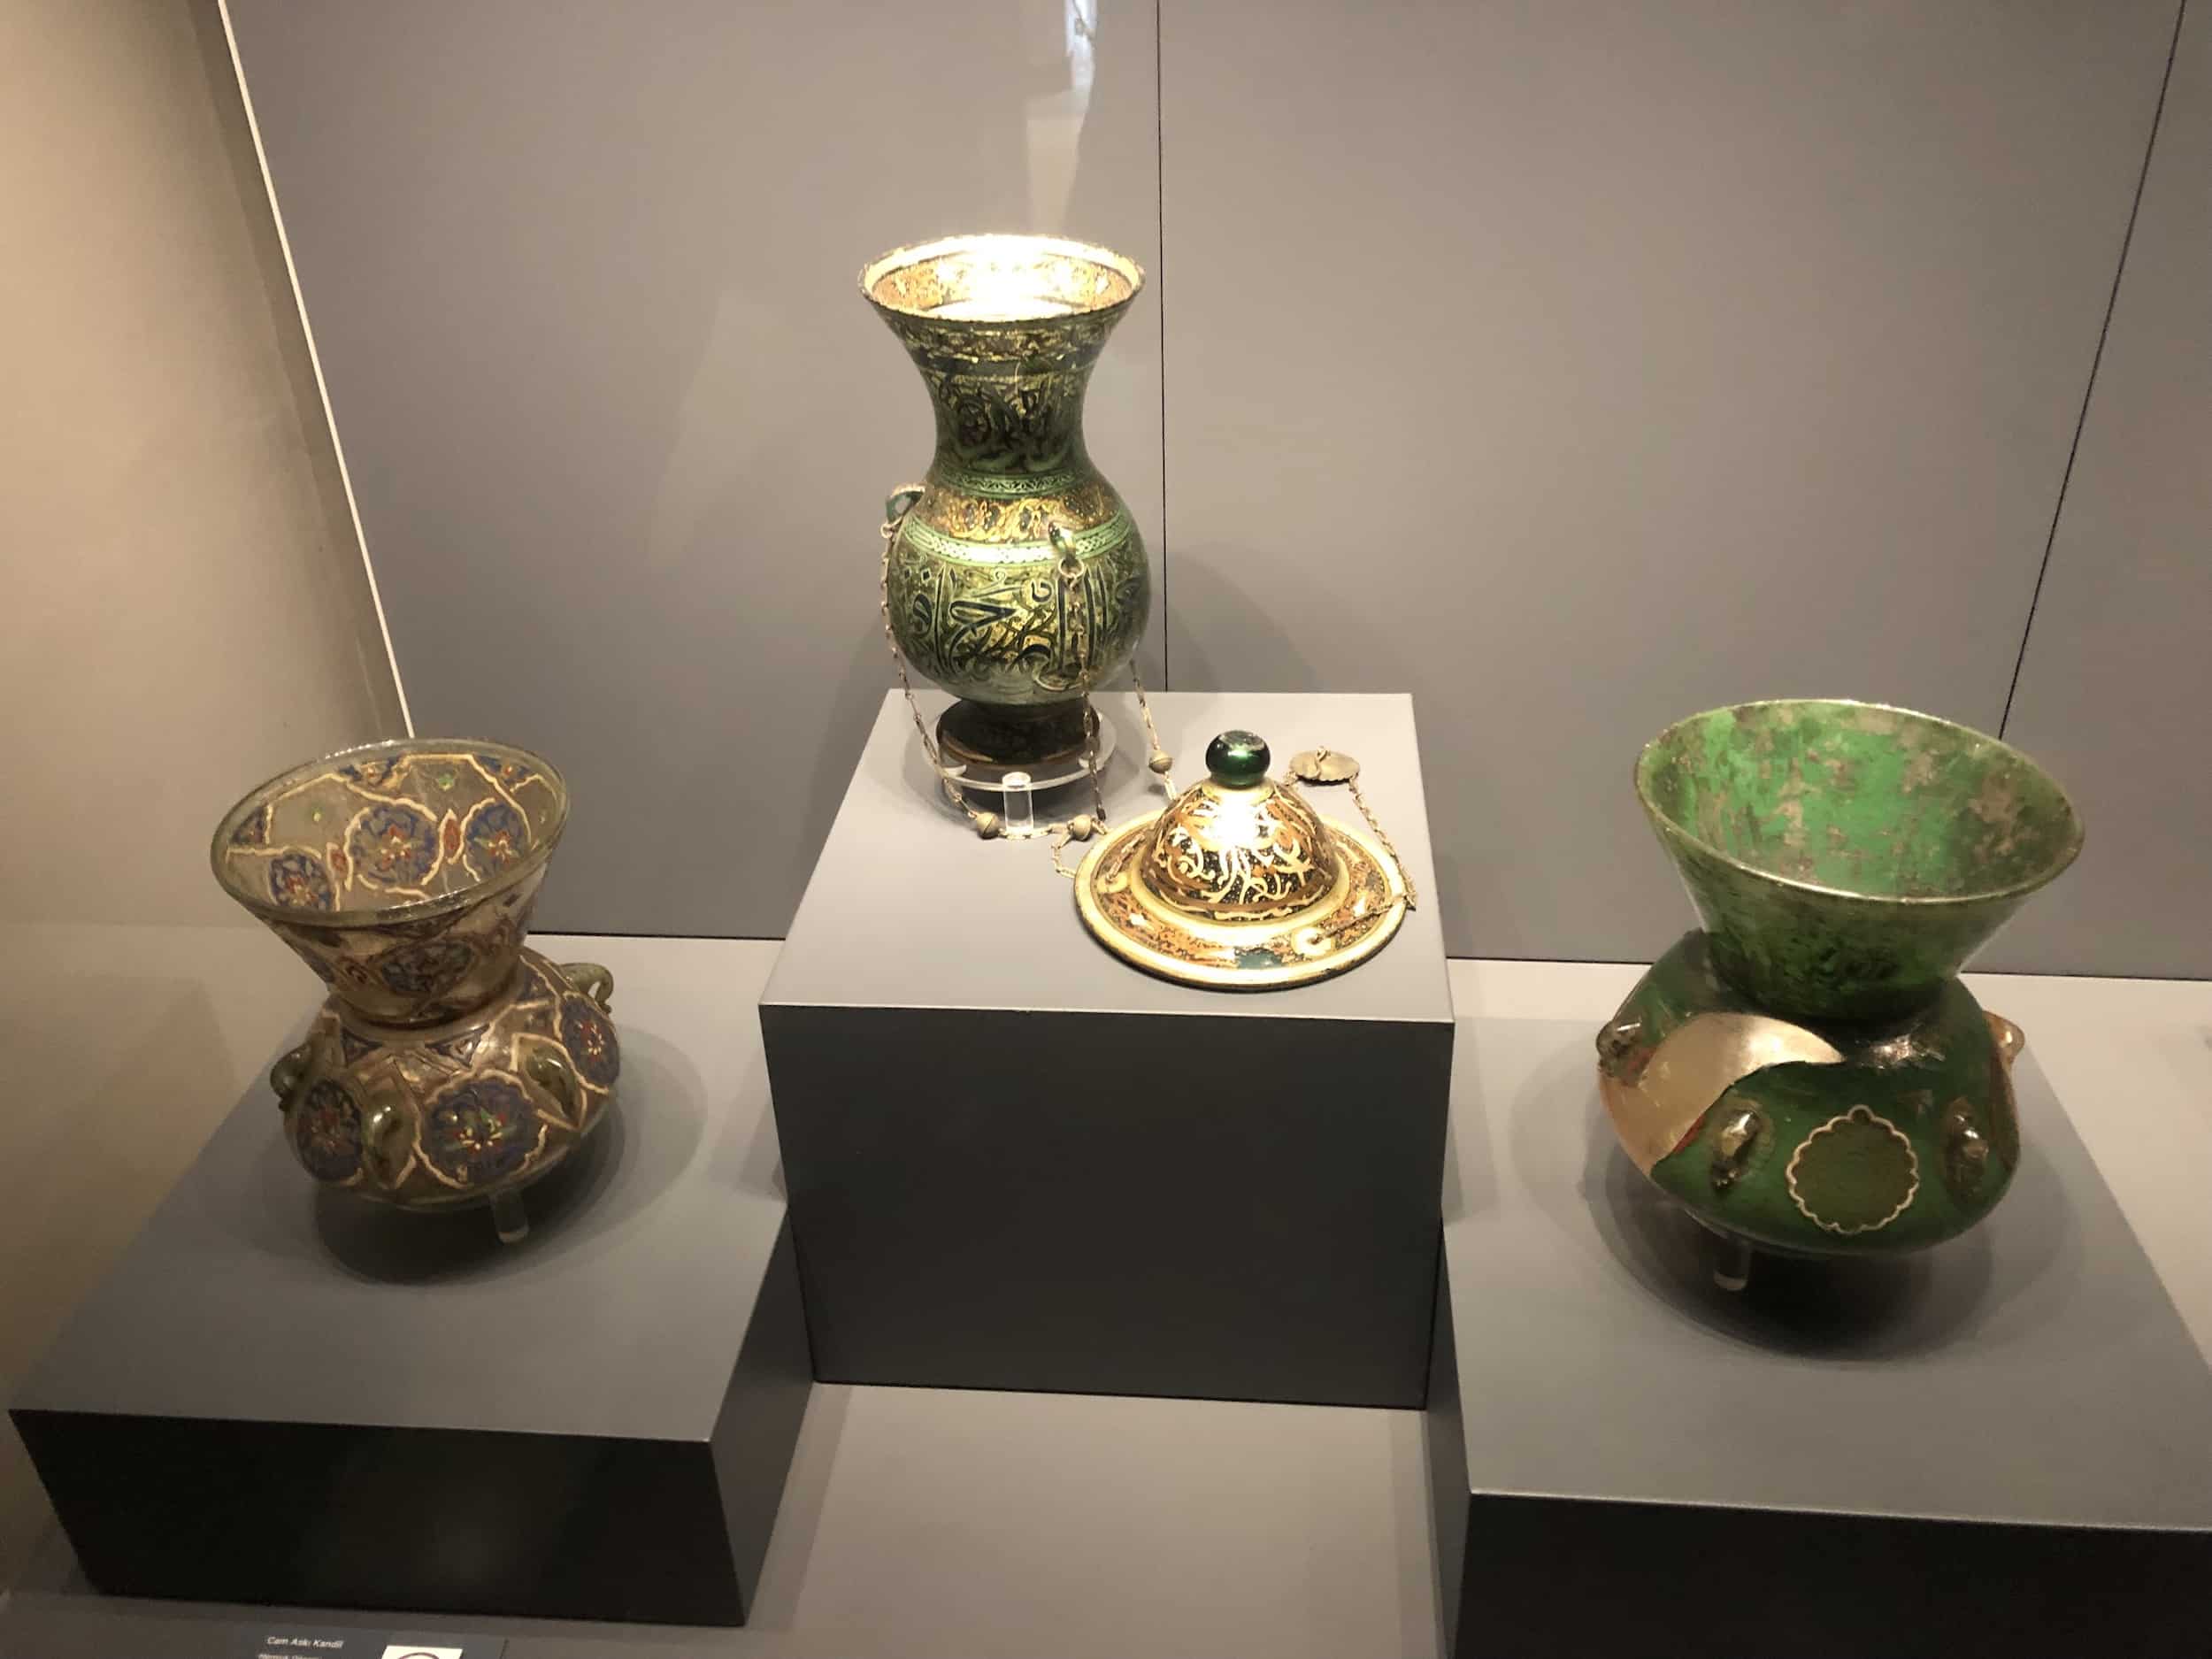 Glass artifacts from the Mamluk period at the Museum of Turkish and Islamic Arts in Istanbul, Turkey